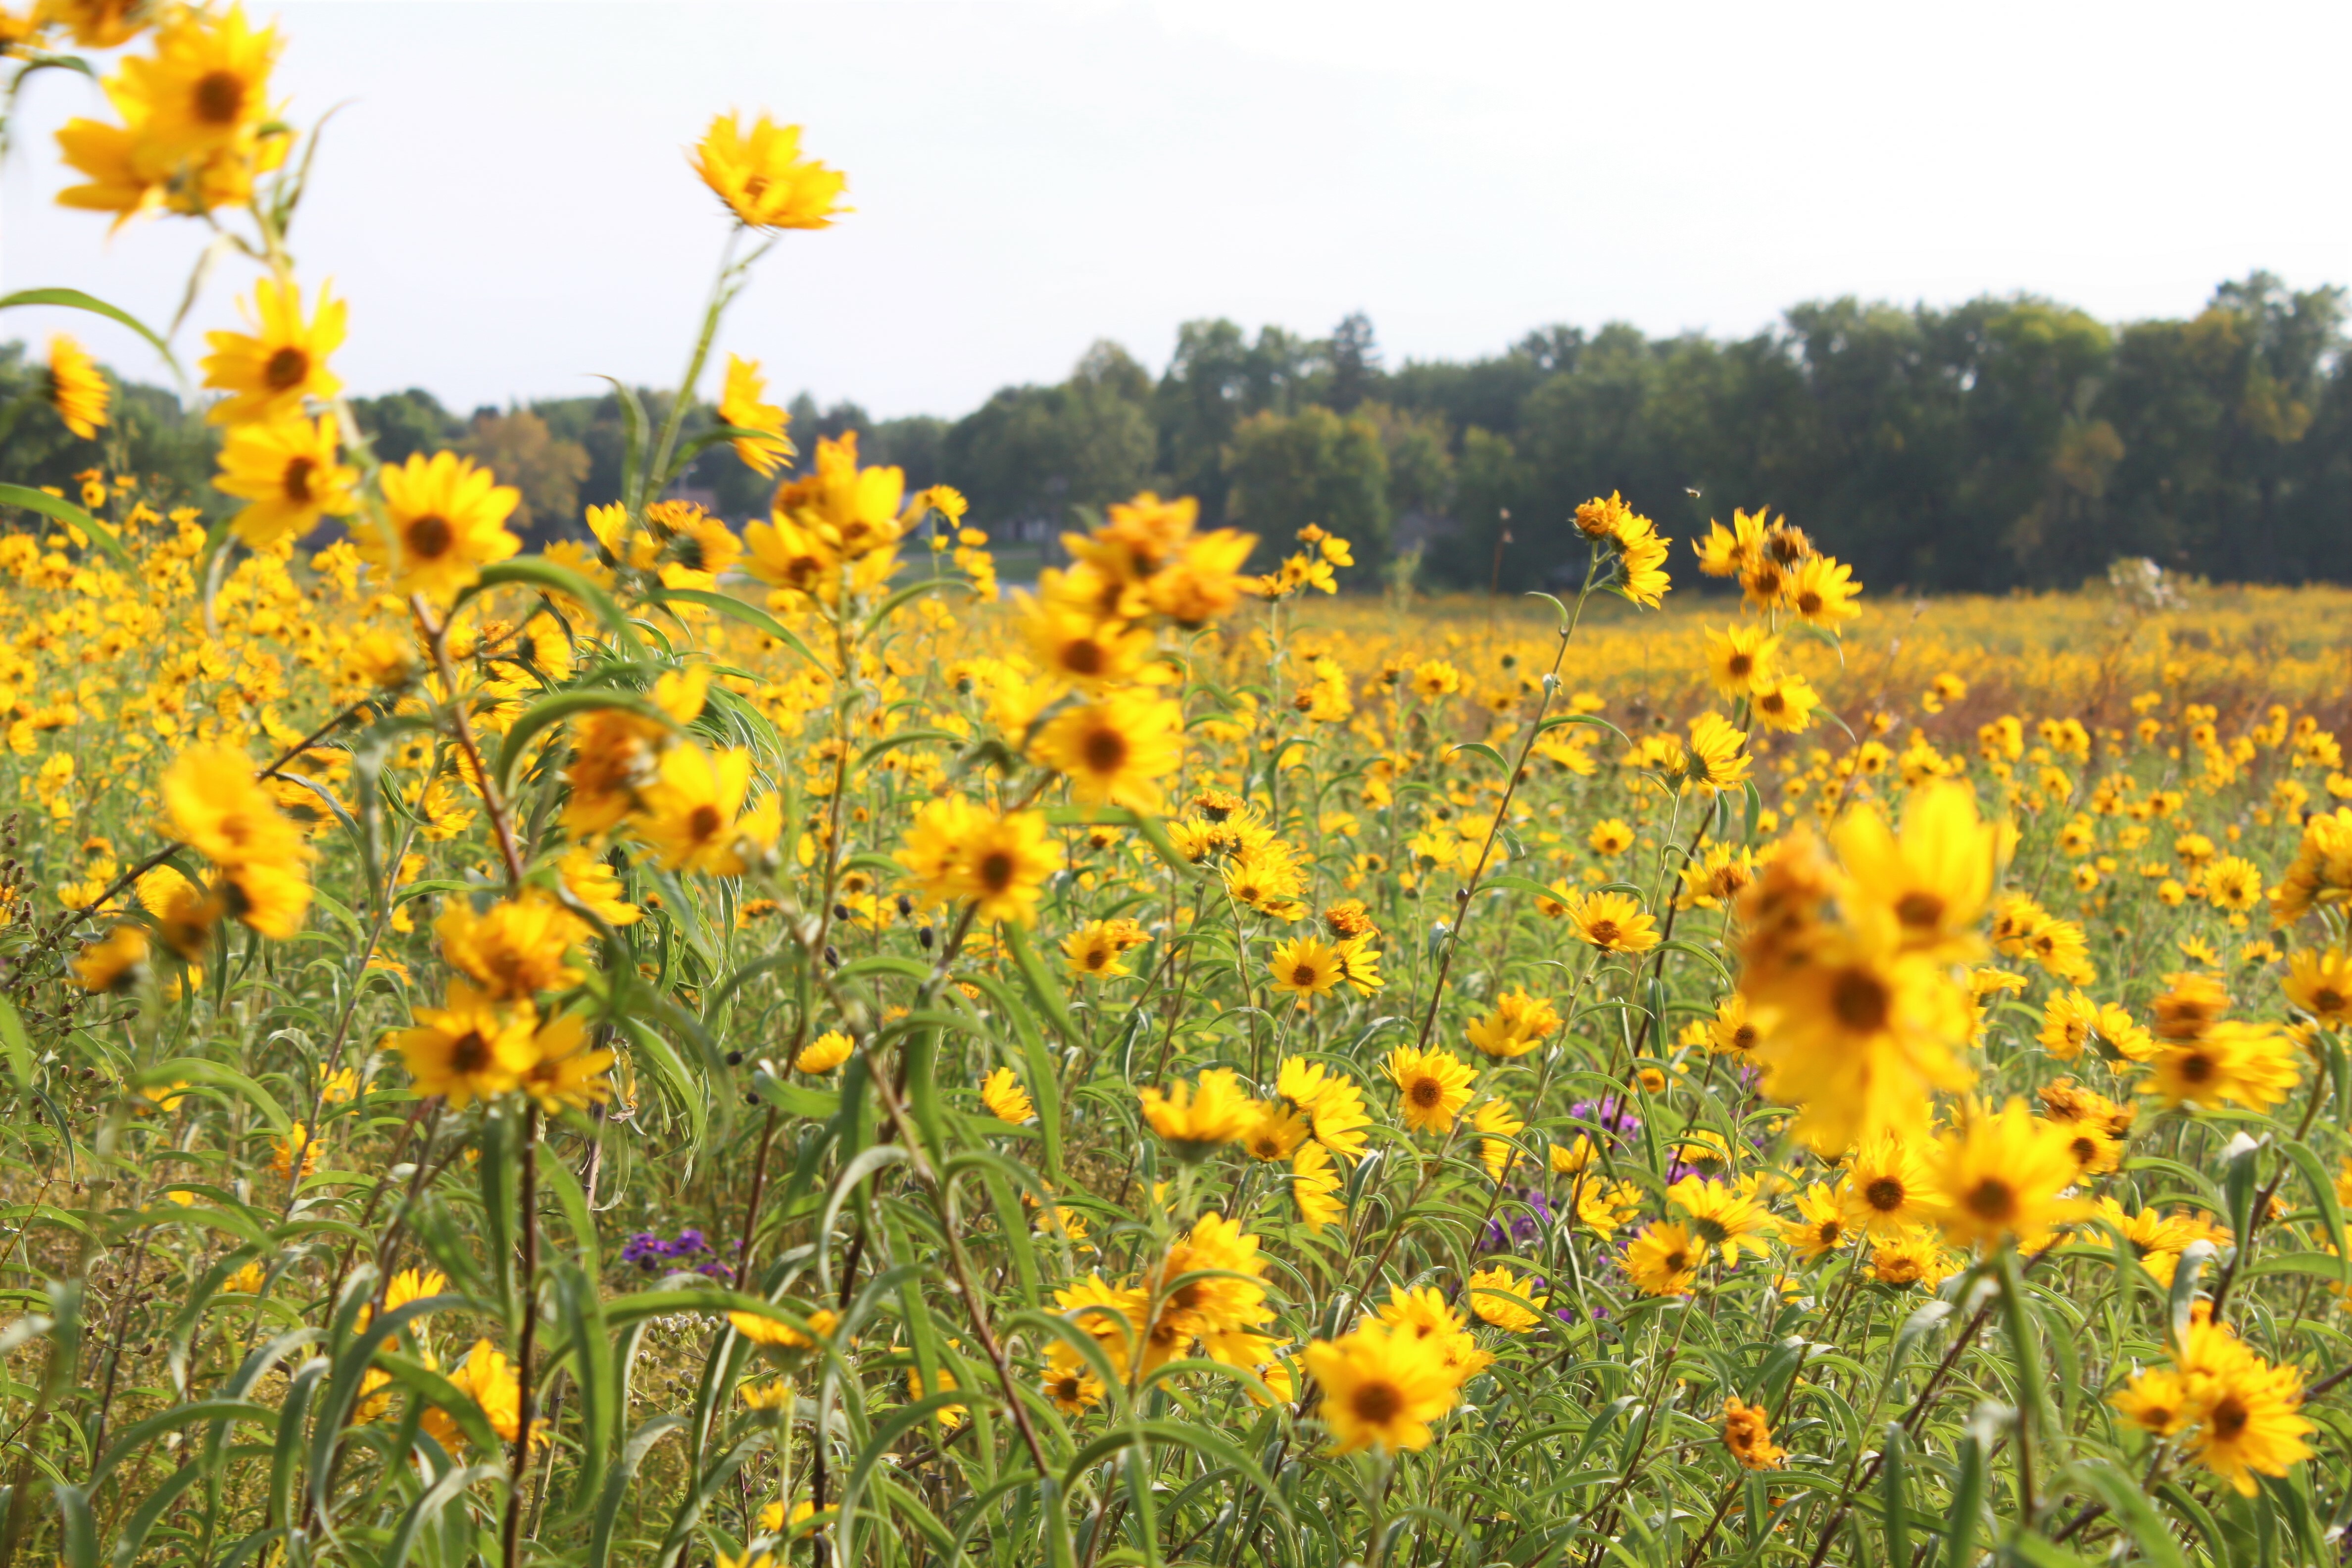 A picture of the yellow prairie flowers in bloom